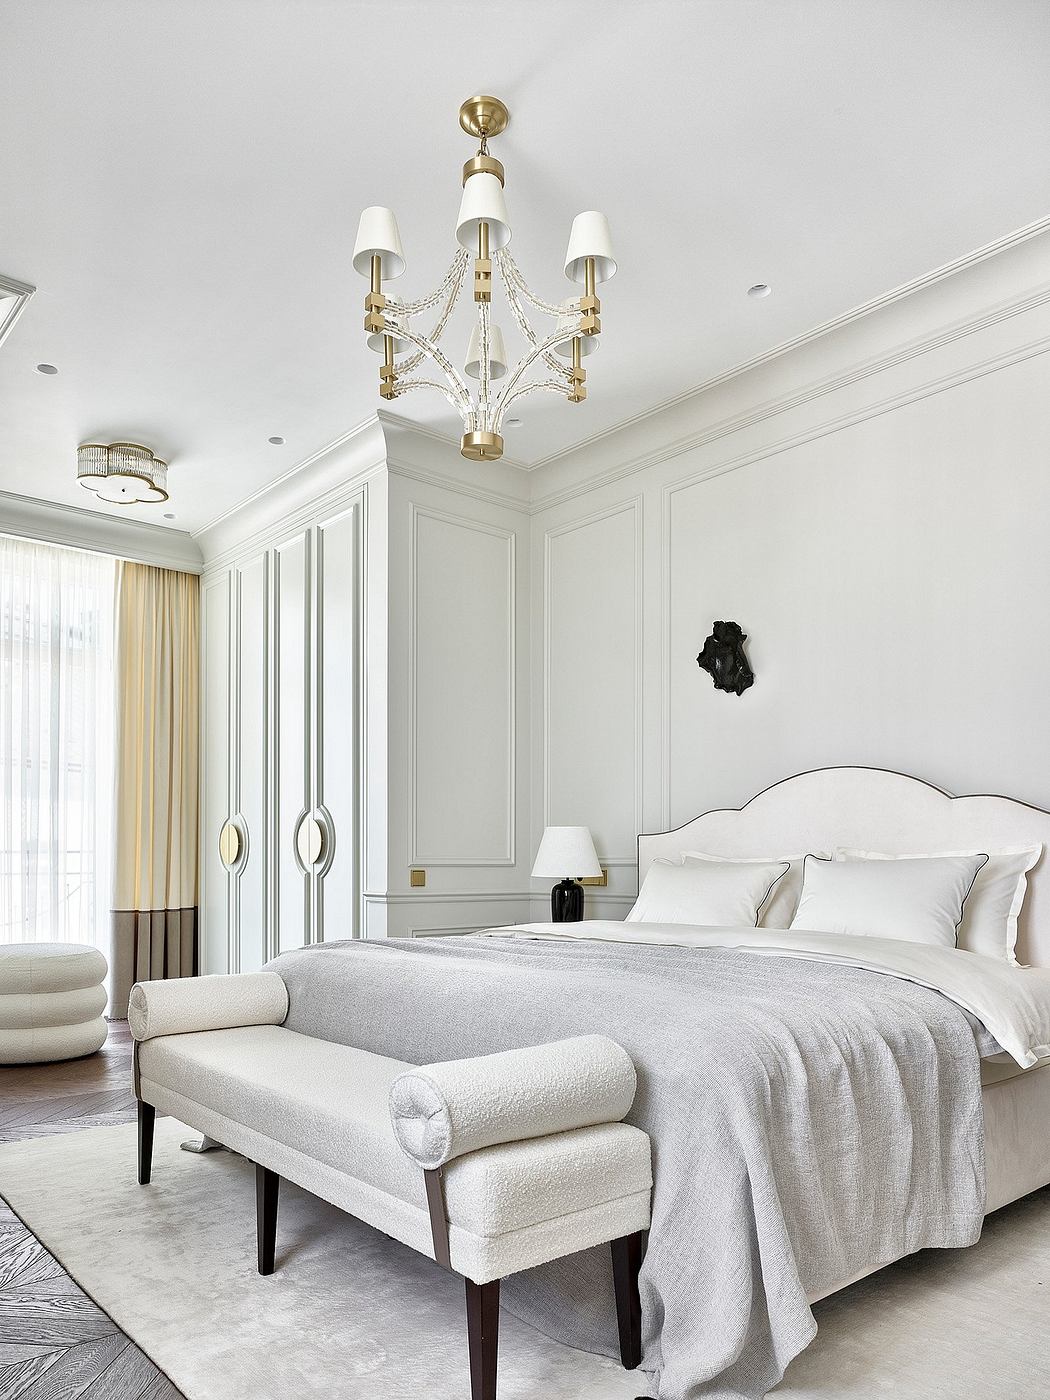 Elegant bedroom with refined architectural details, plush furnishings, and a luxurious chandelier.